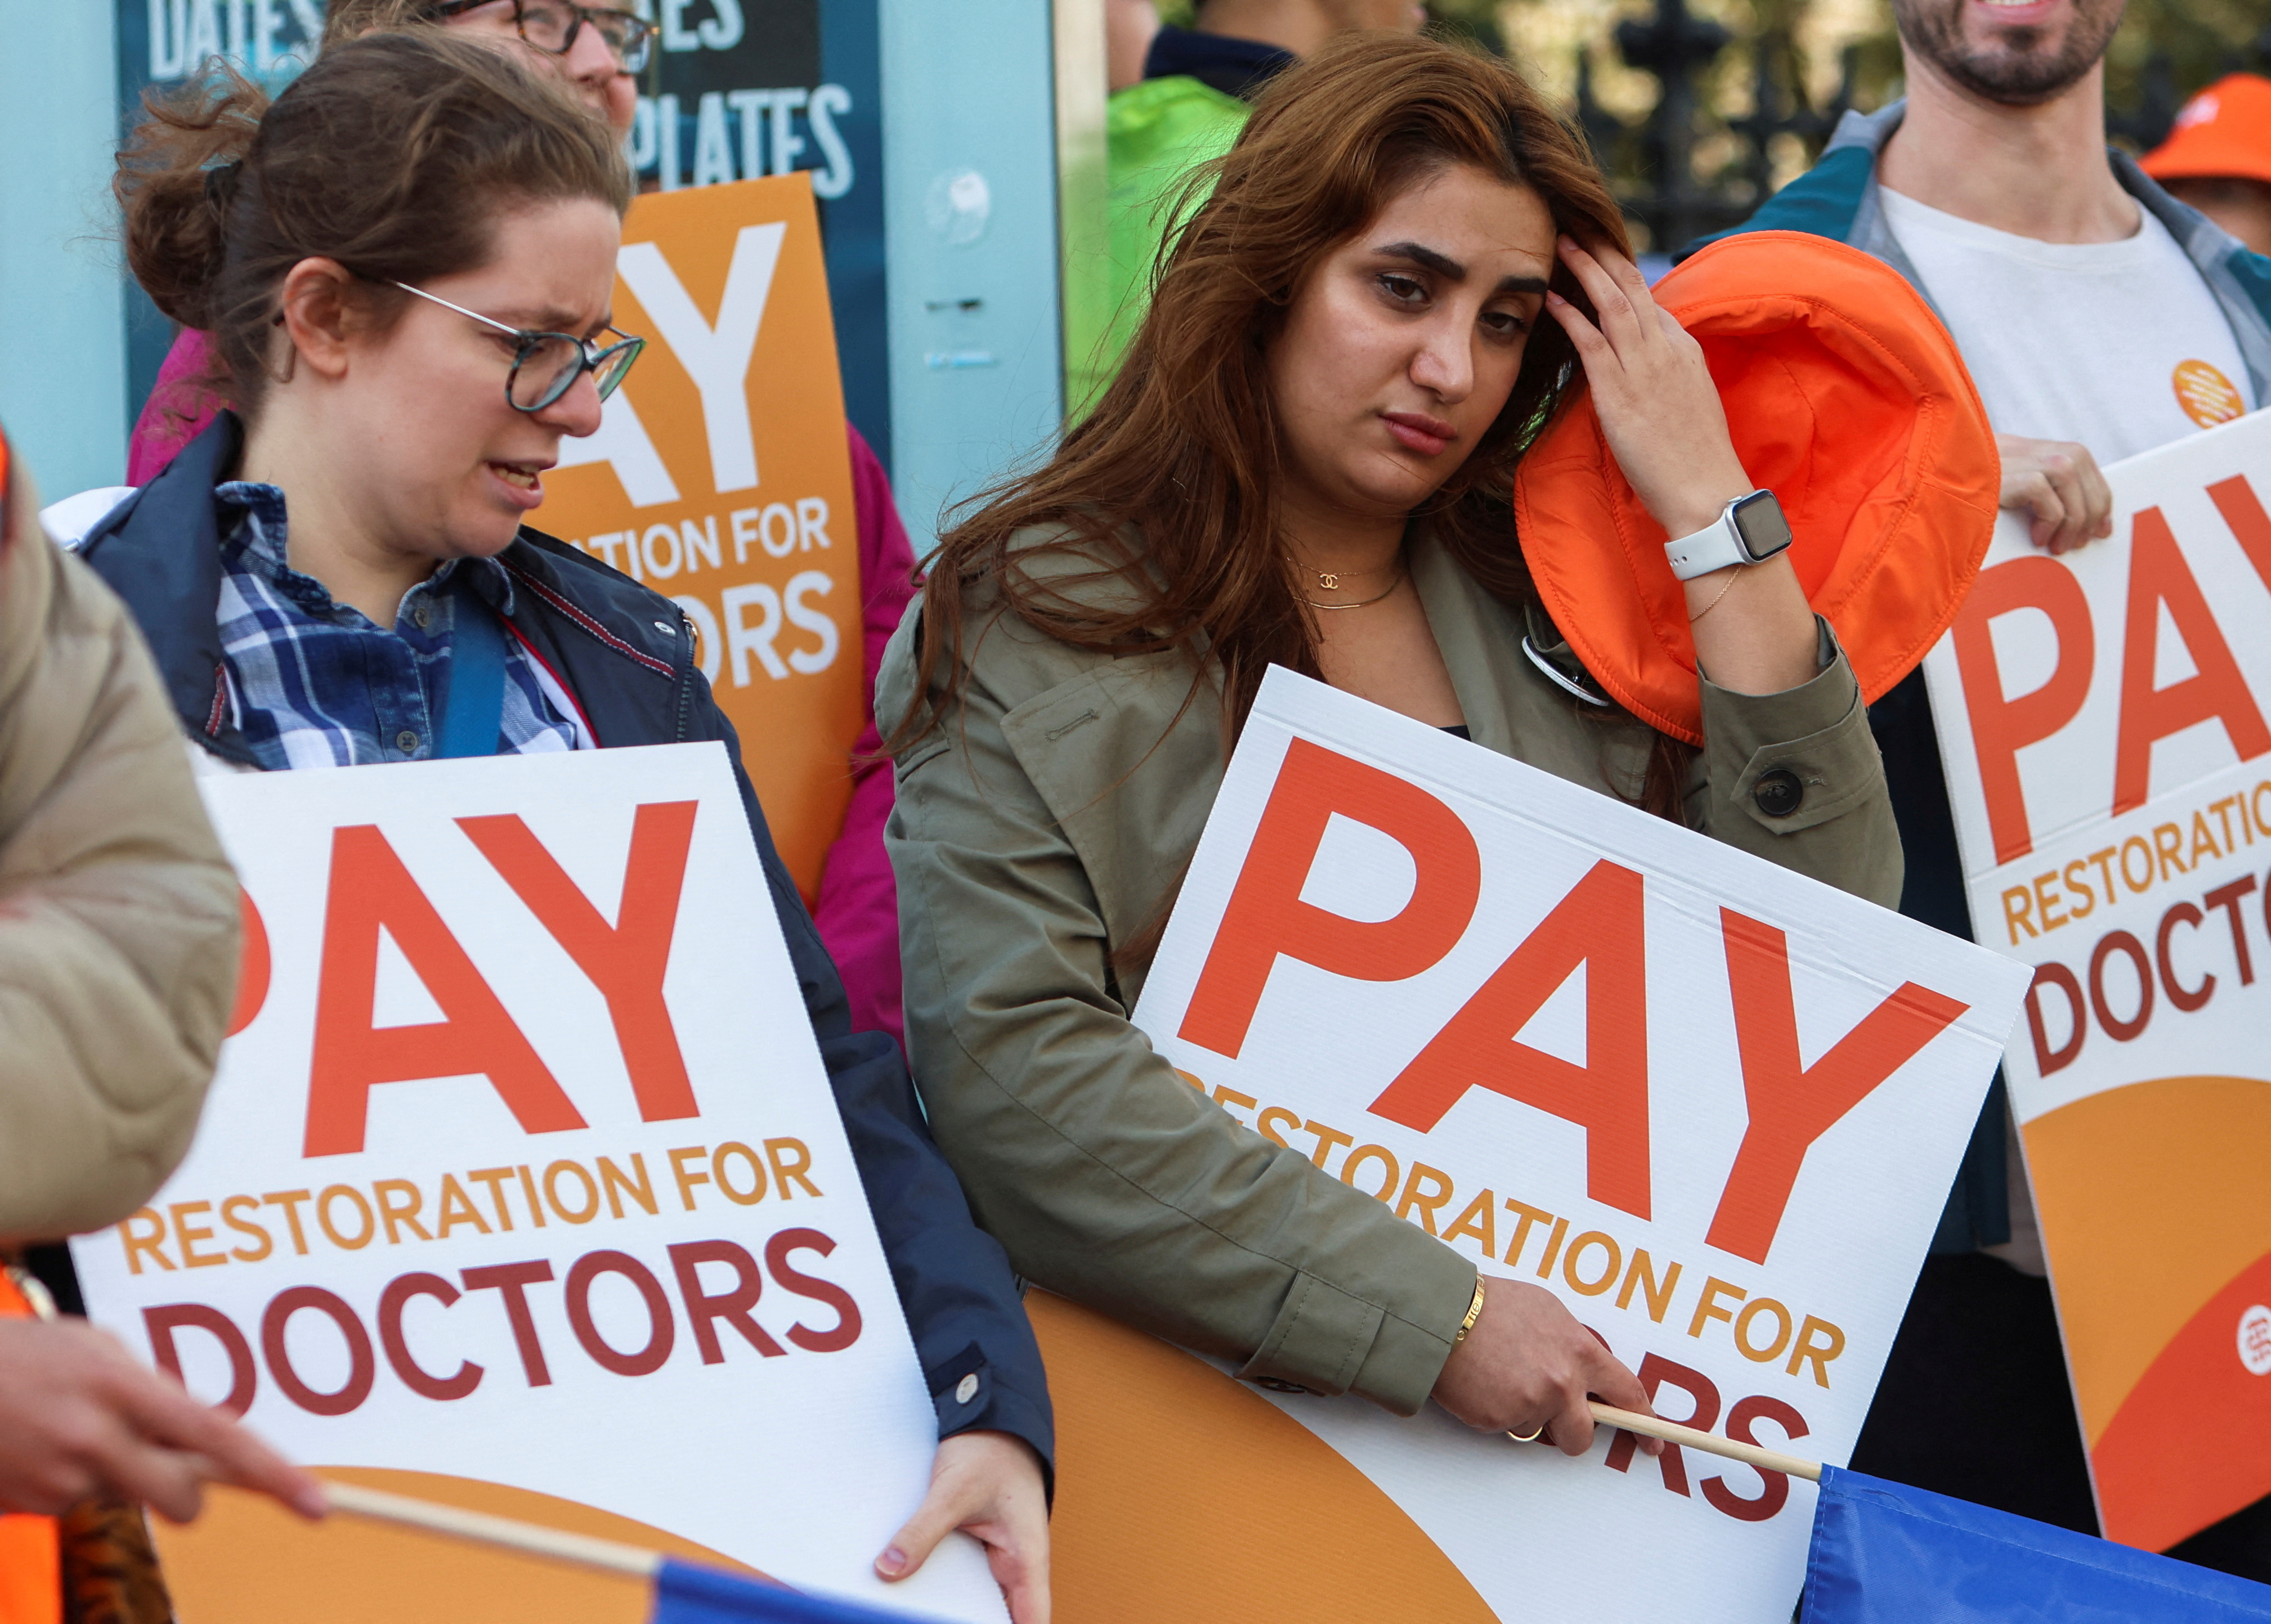 Junior and senior doctors in England take part in a joint strike action for the first time in pay dispute